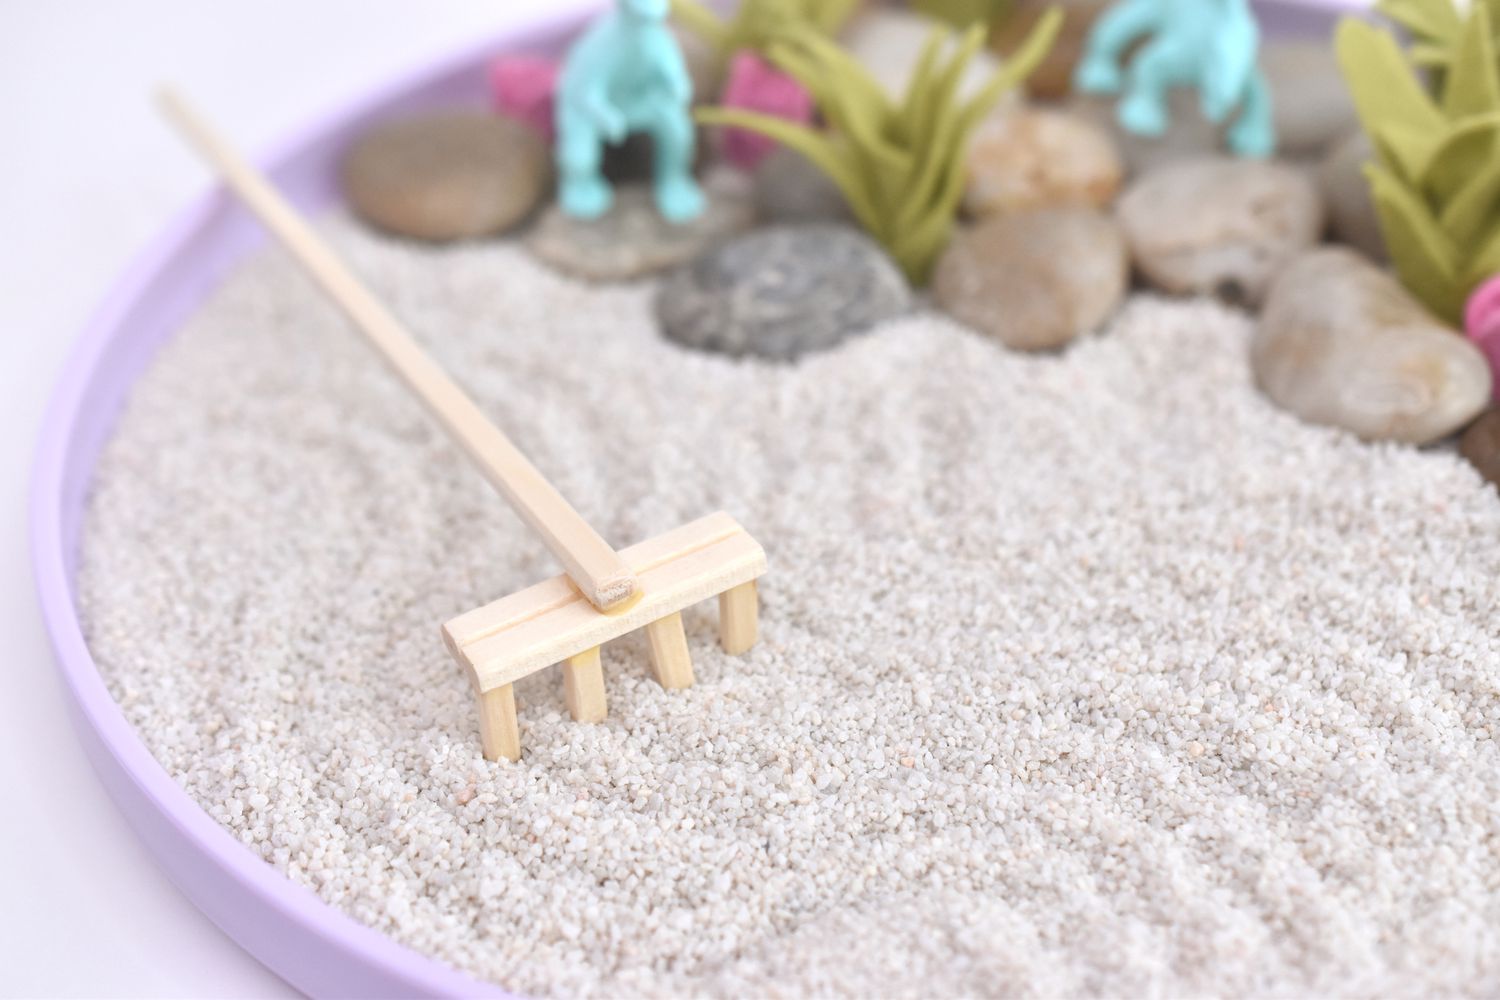 Use the Rake to Make Designs in the Sand